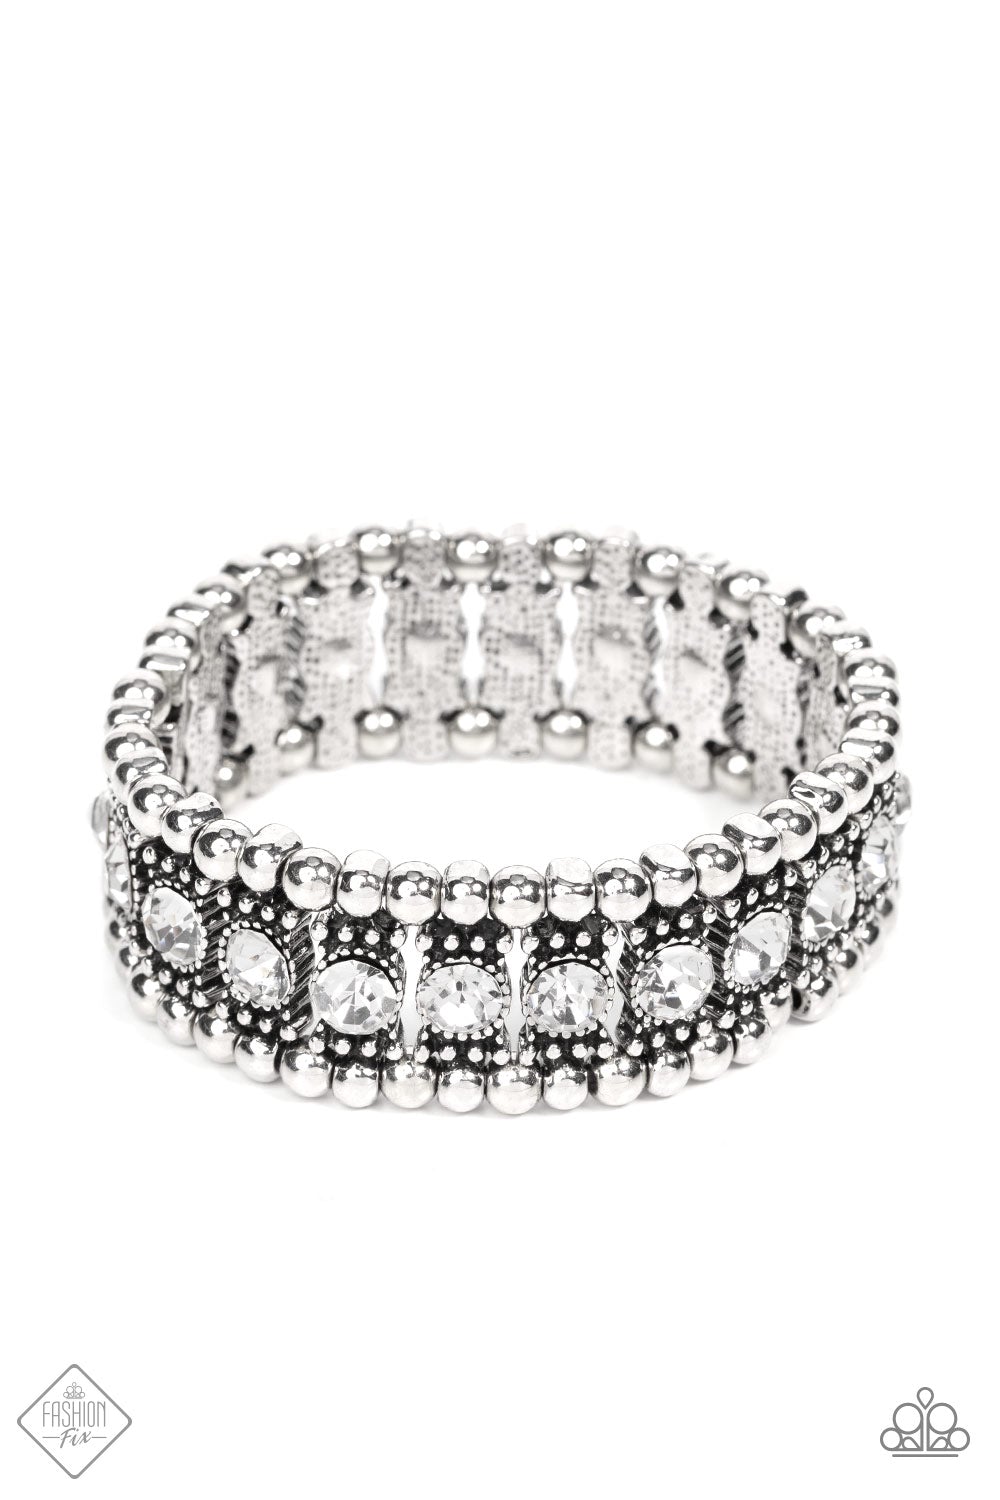 Paparazzi Ritzy Reboot White Stretch Bracelet - Fashion Fix Magnificent Musings December 2021 - P9ED-WTXX-034EE